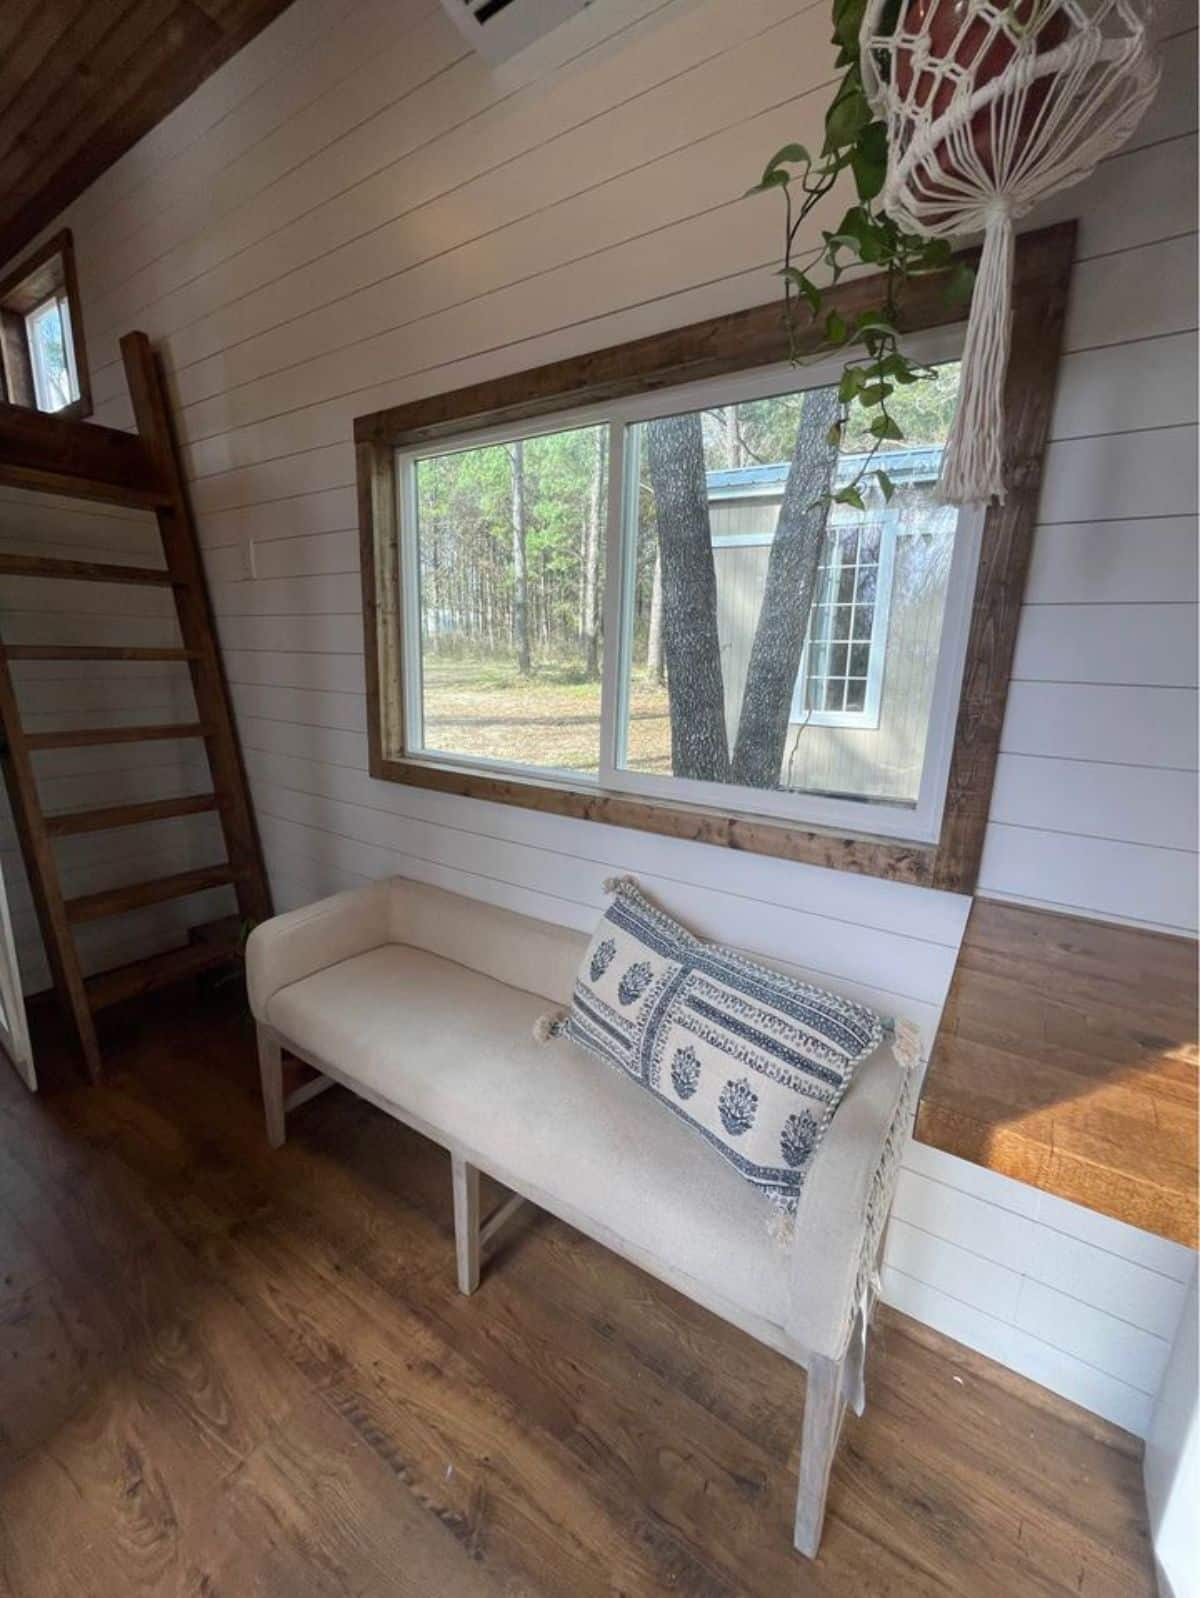 living area of 24’ tiny house on wheels